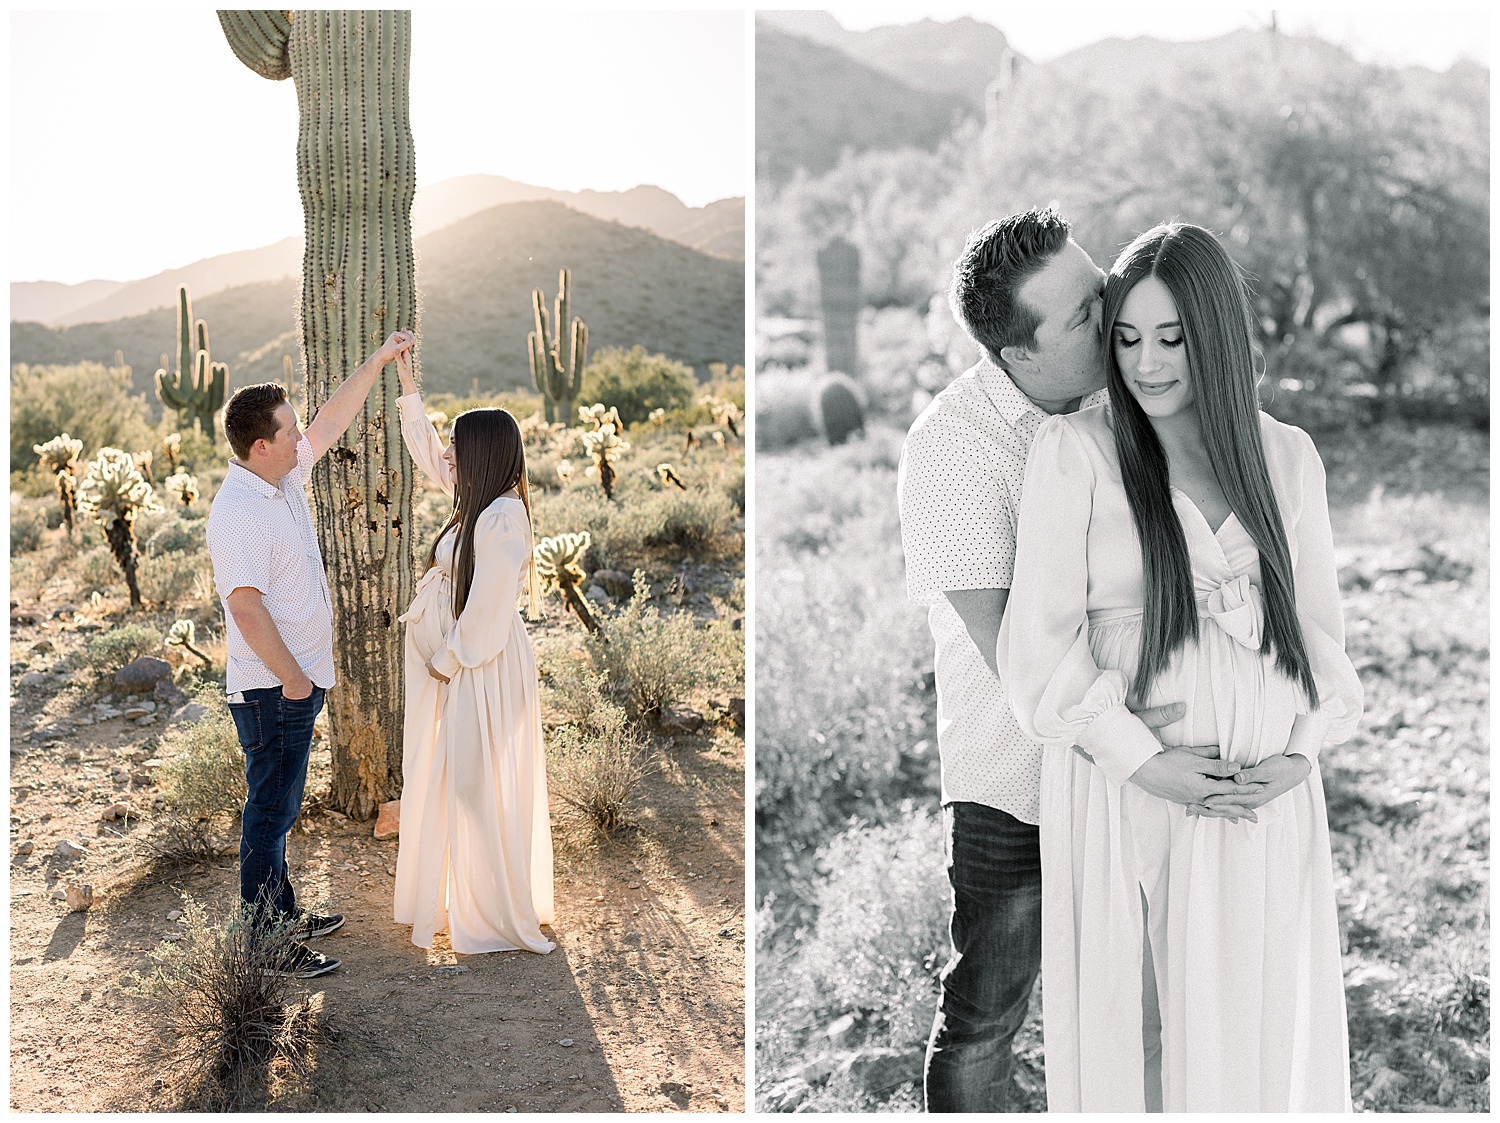 Arizona Maternity Photography, Desert Maternity Session, Ivory gown client closet